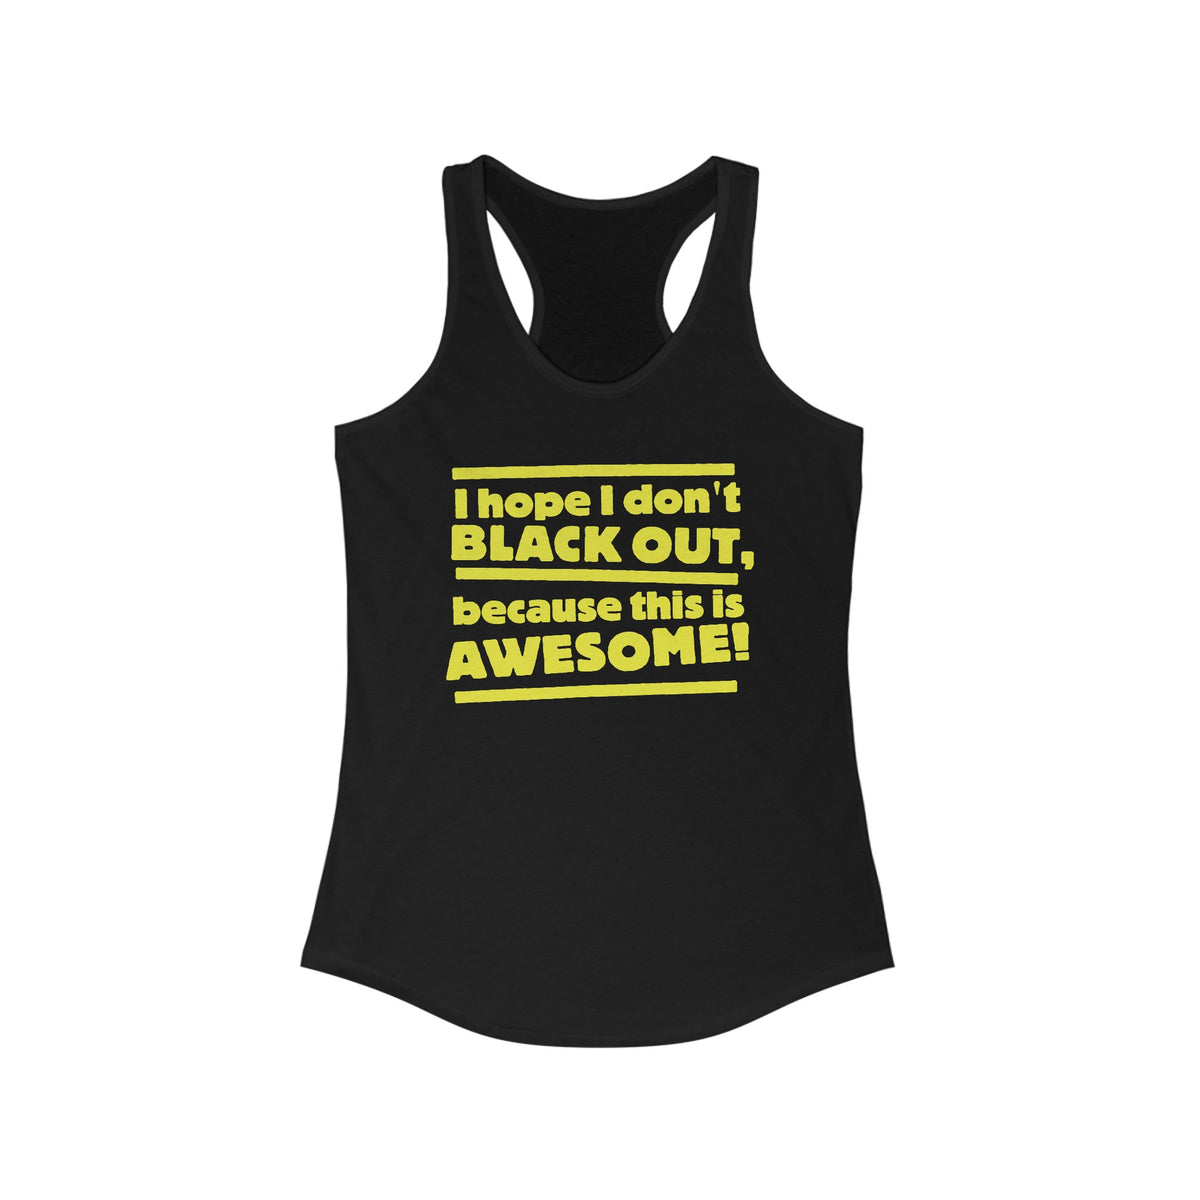 I Hope I Don't Black Out Because This Is Awesome!  - Women’s Racerback Tank